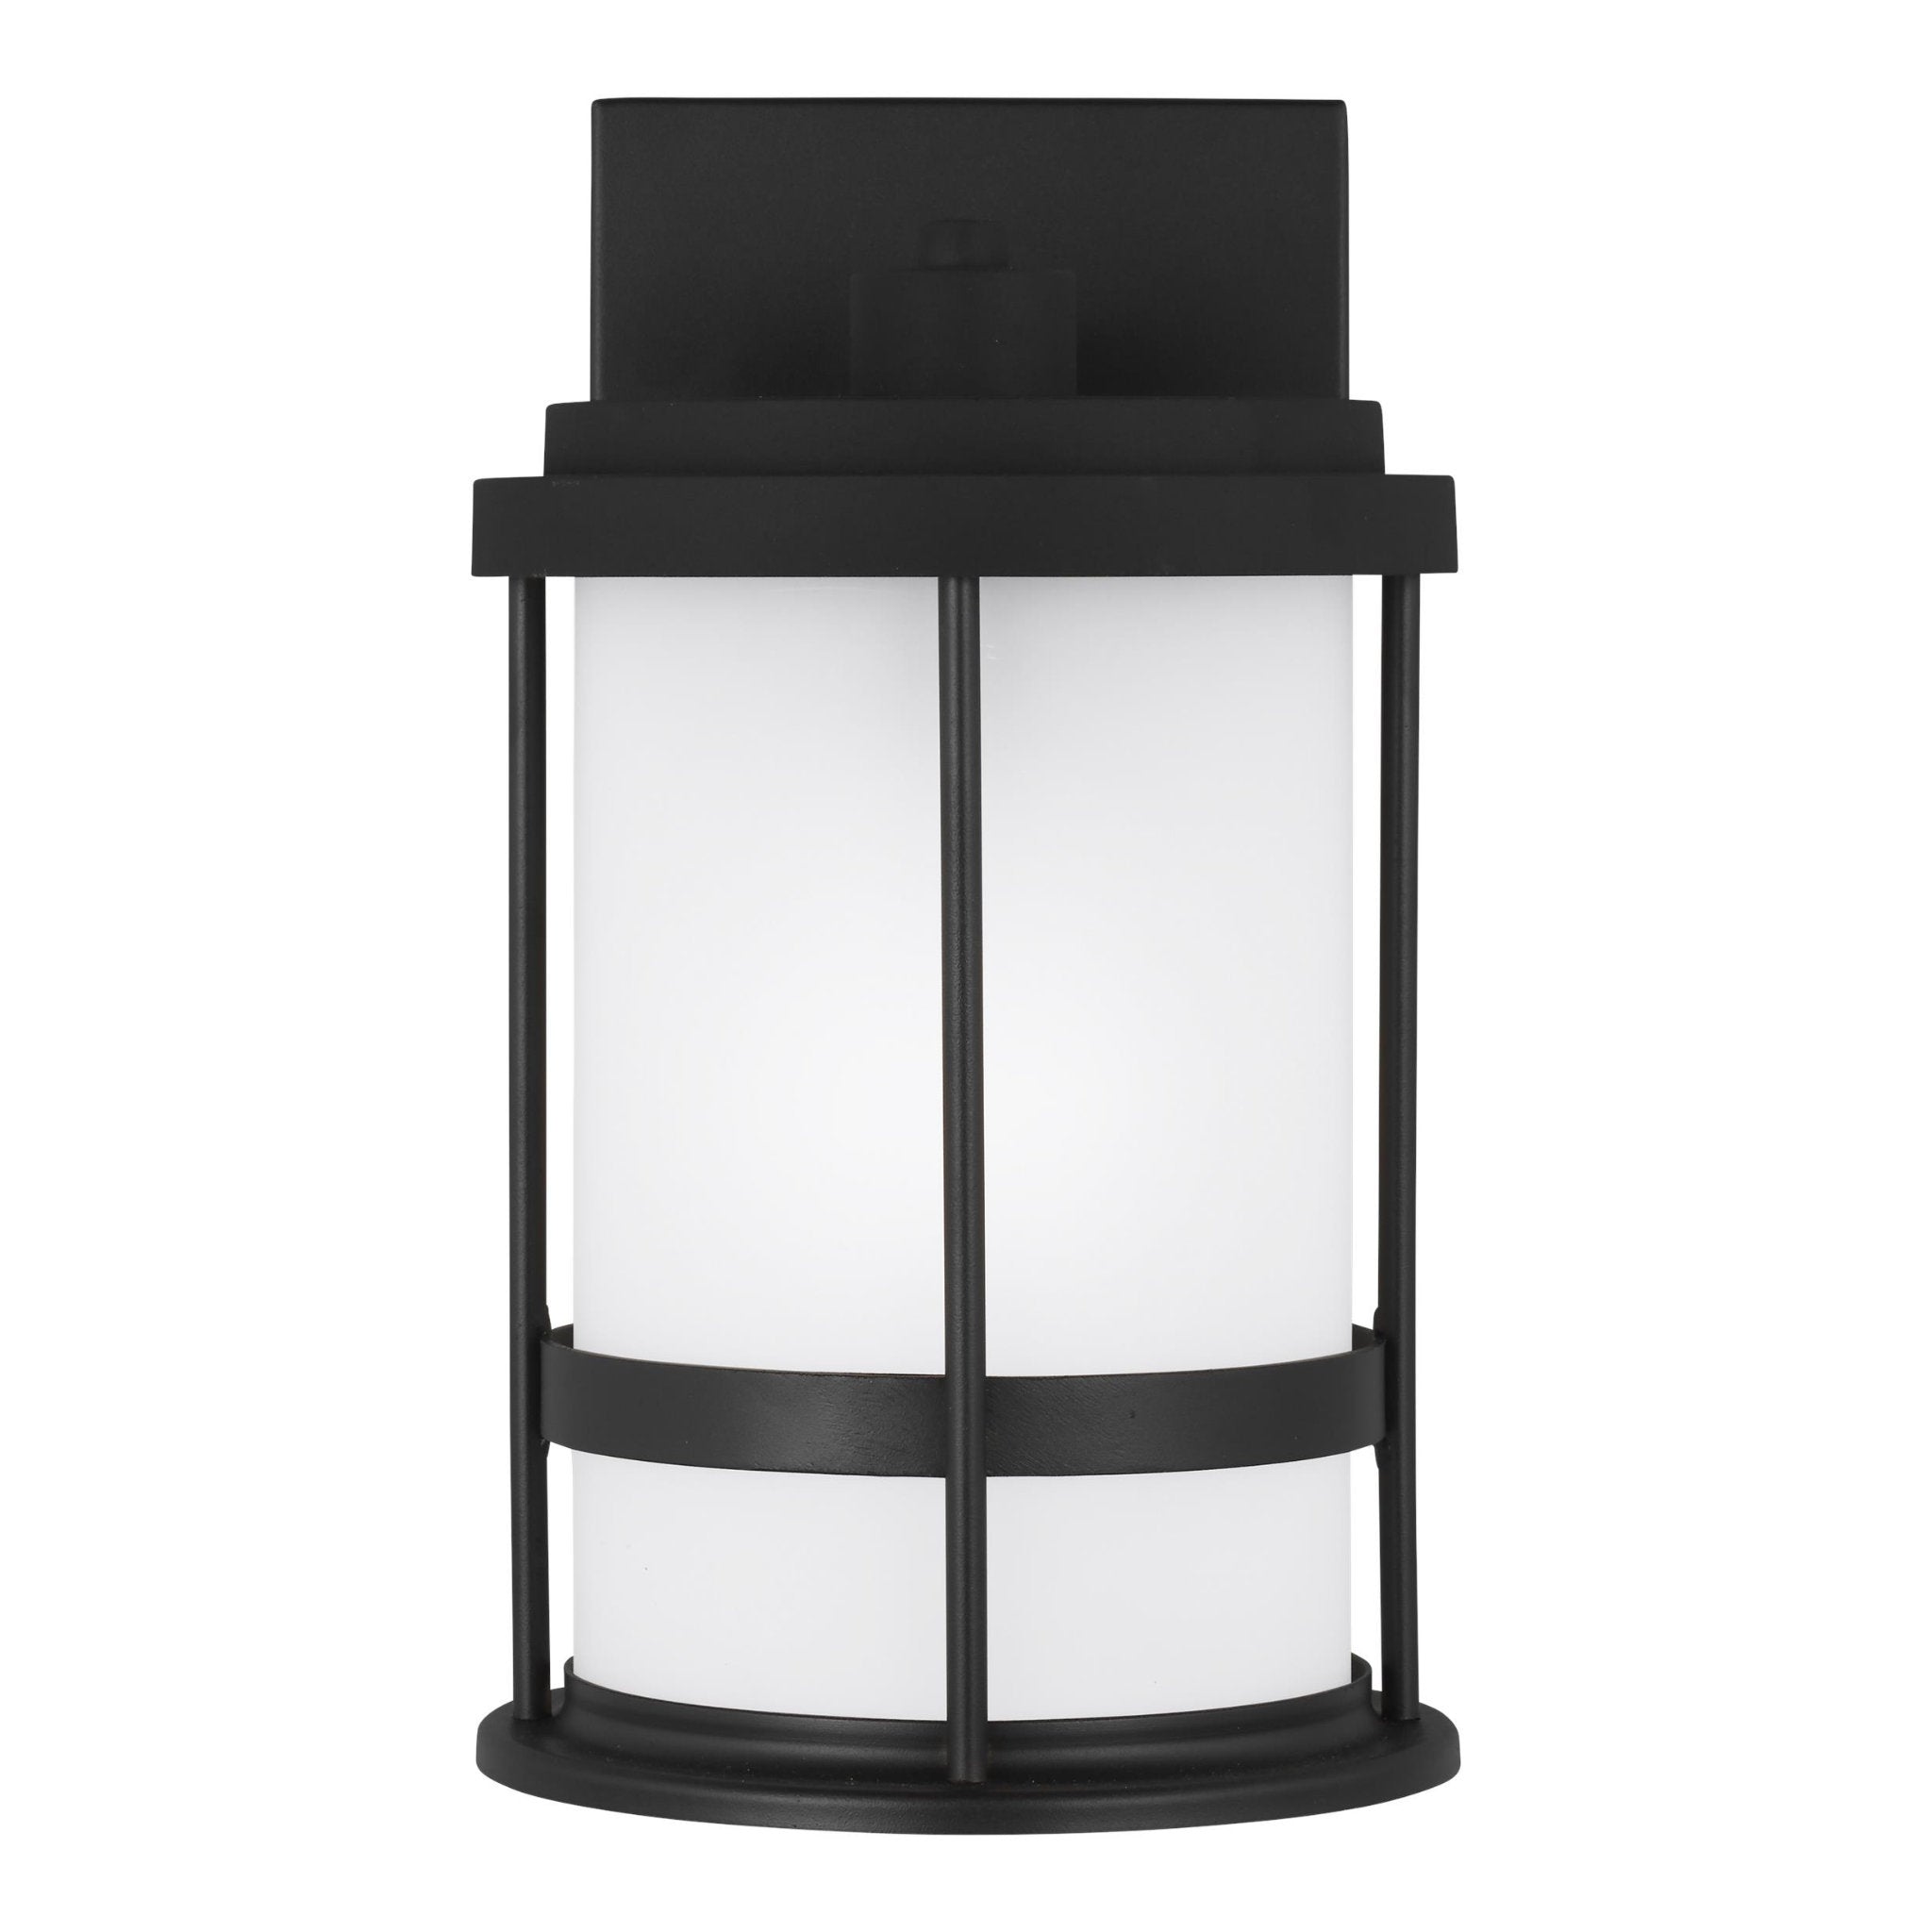 Wilburn Small One Light Outdoor Wall Lantern LED Transitional Fixture Dark Sky 6" Width 10.25" Height Aluminum Round Satin Etched Shade in Black